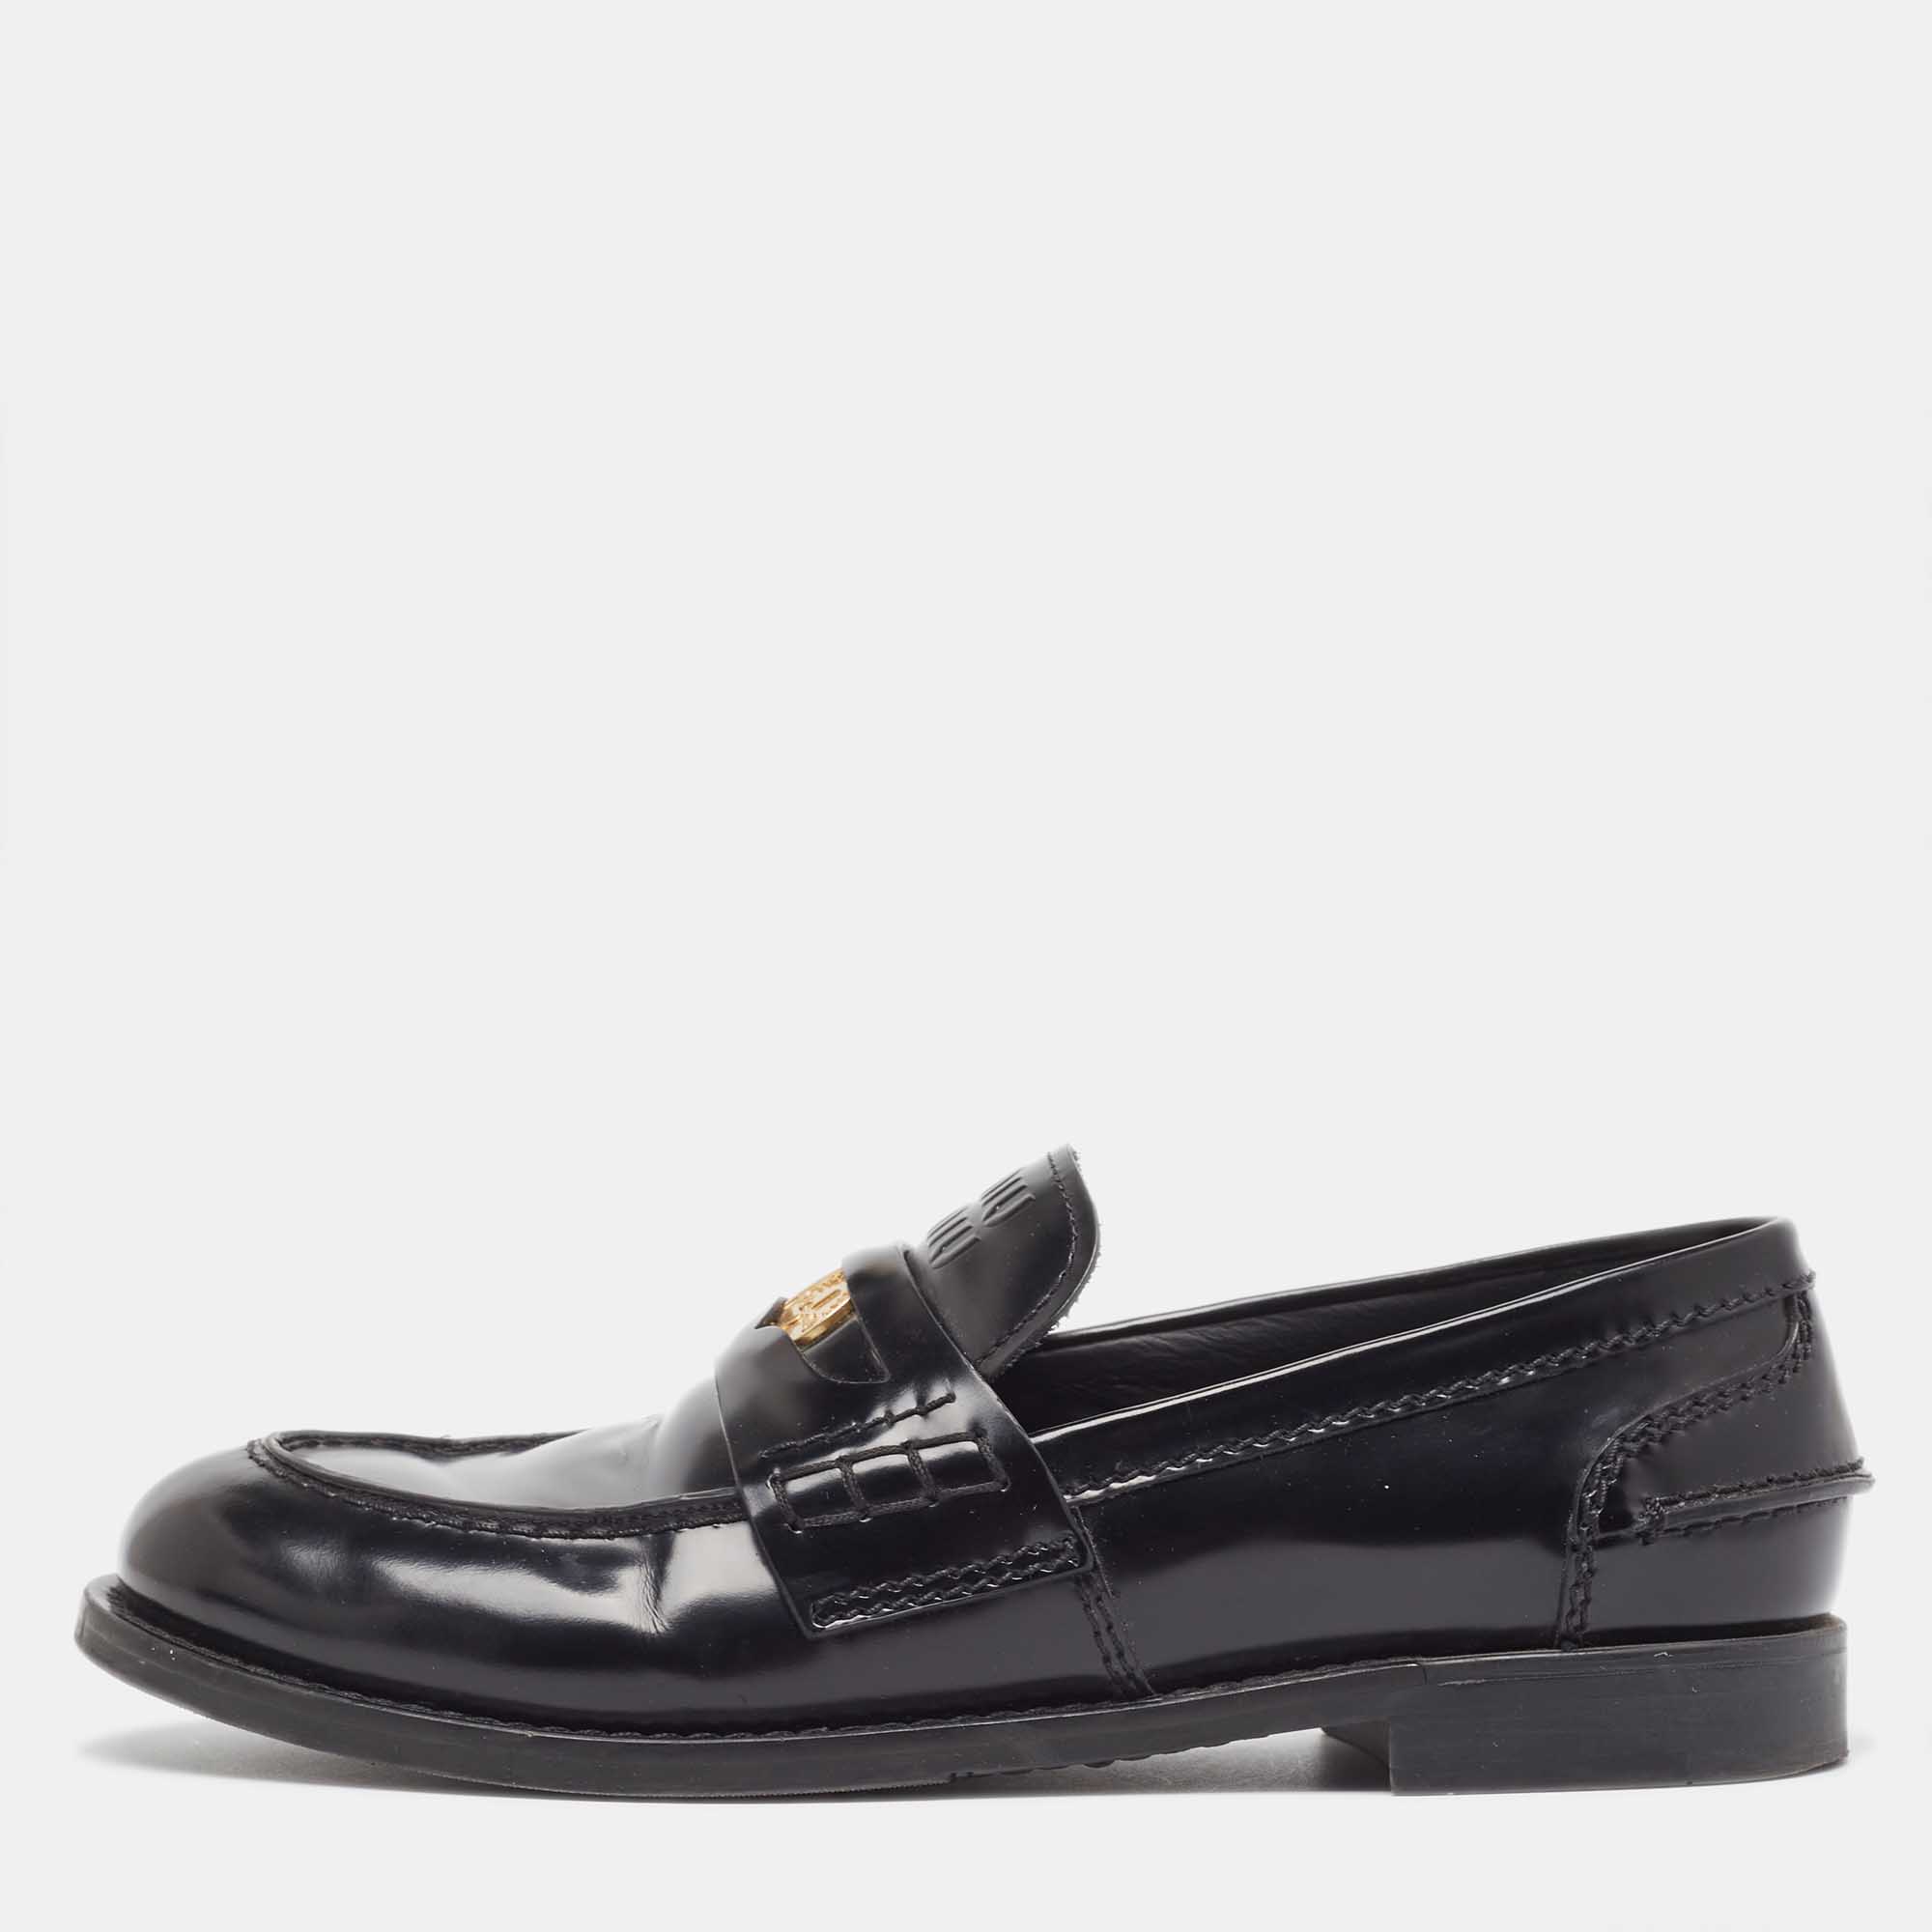 

Miu Miu Black Brushed Leather Penny Loafers Size